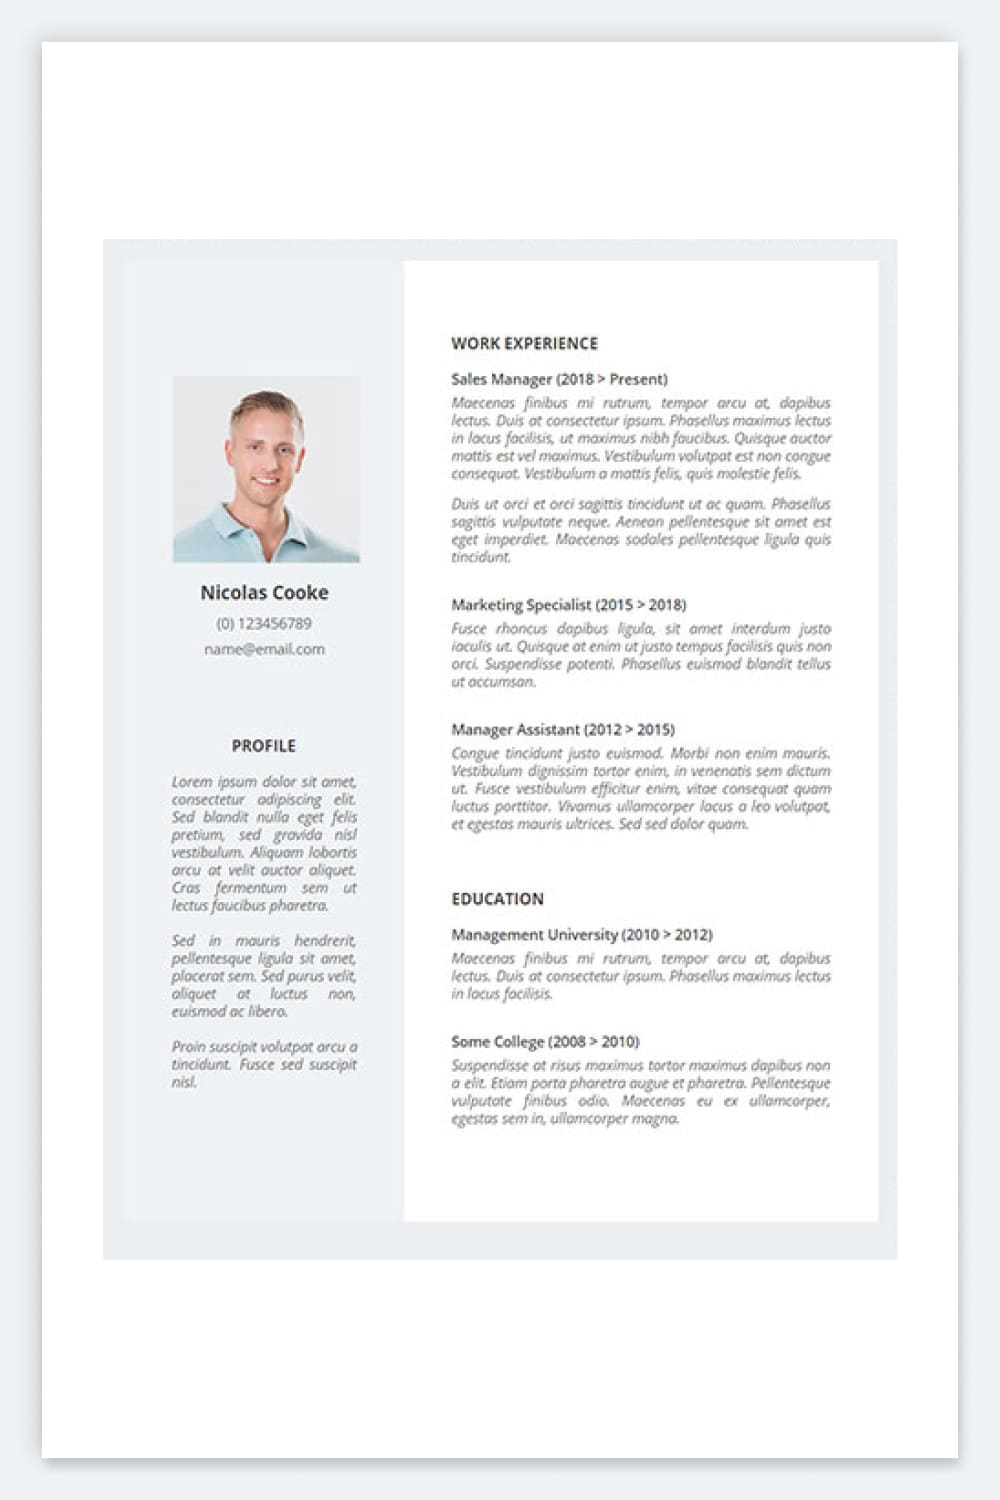 Resume with photo, two columns and gray and white color scheme.